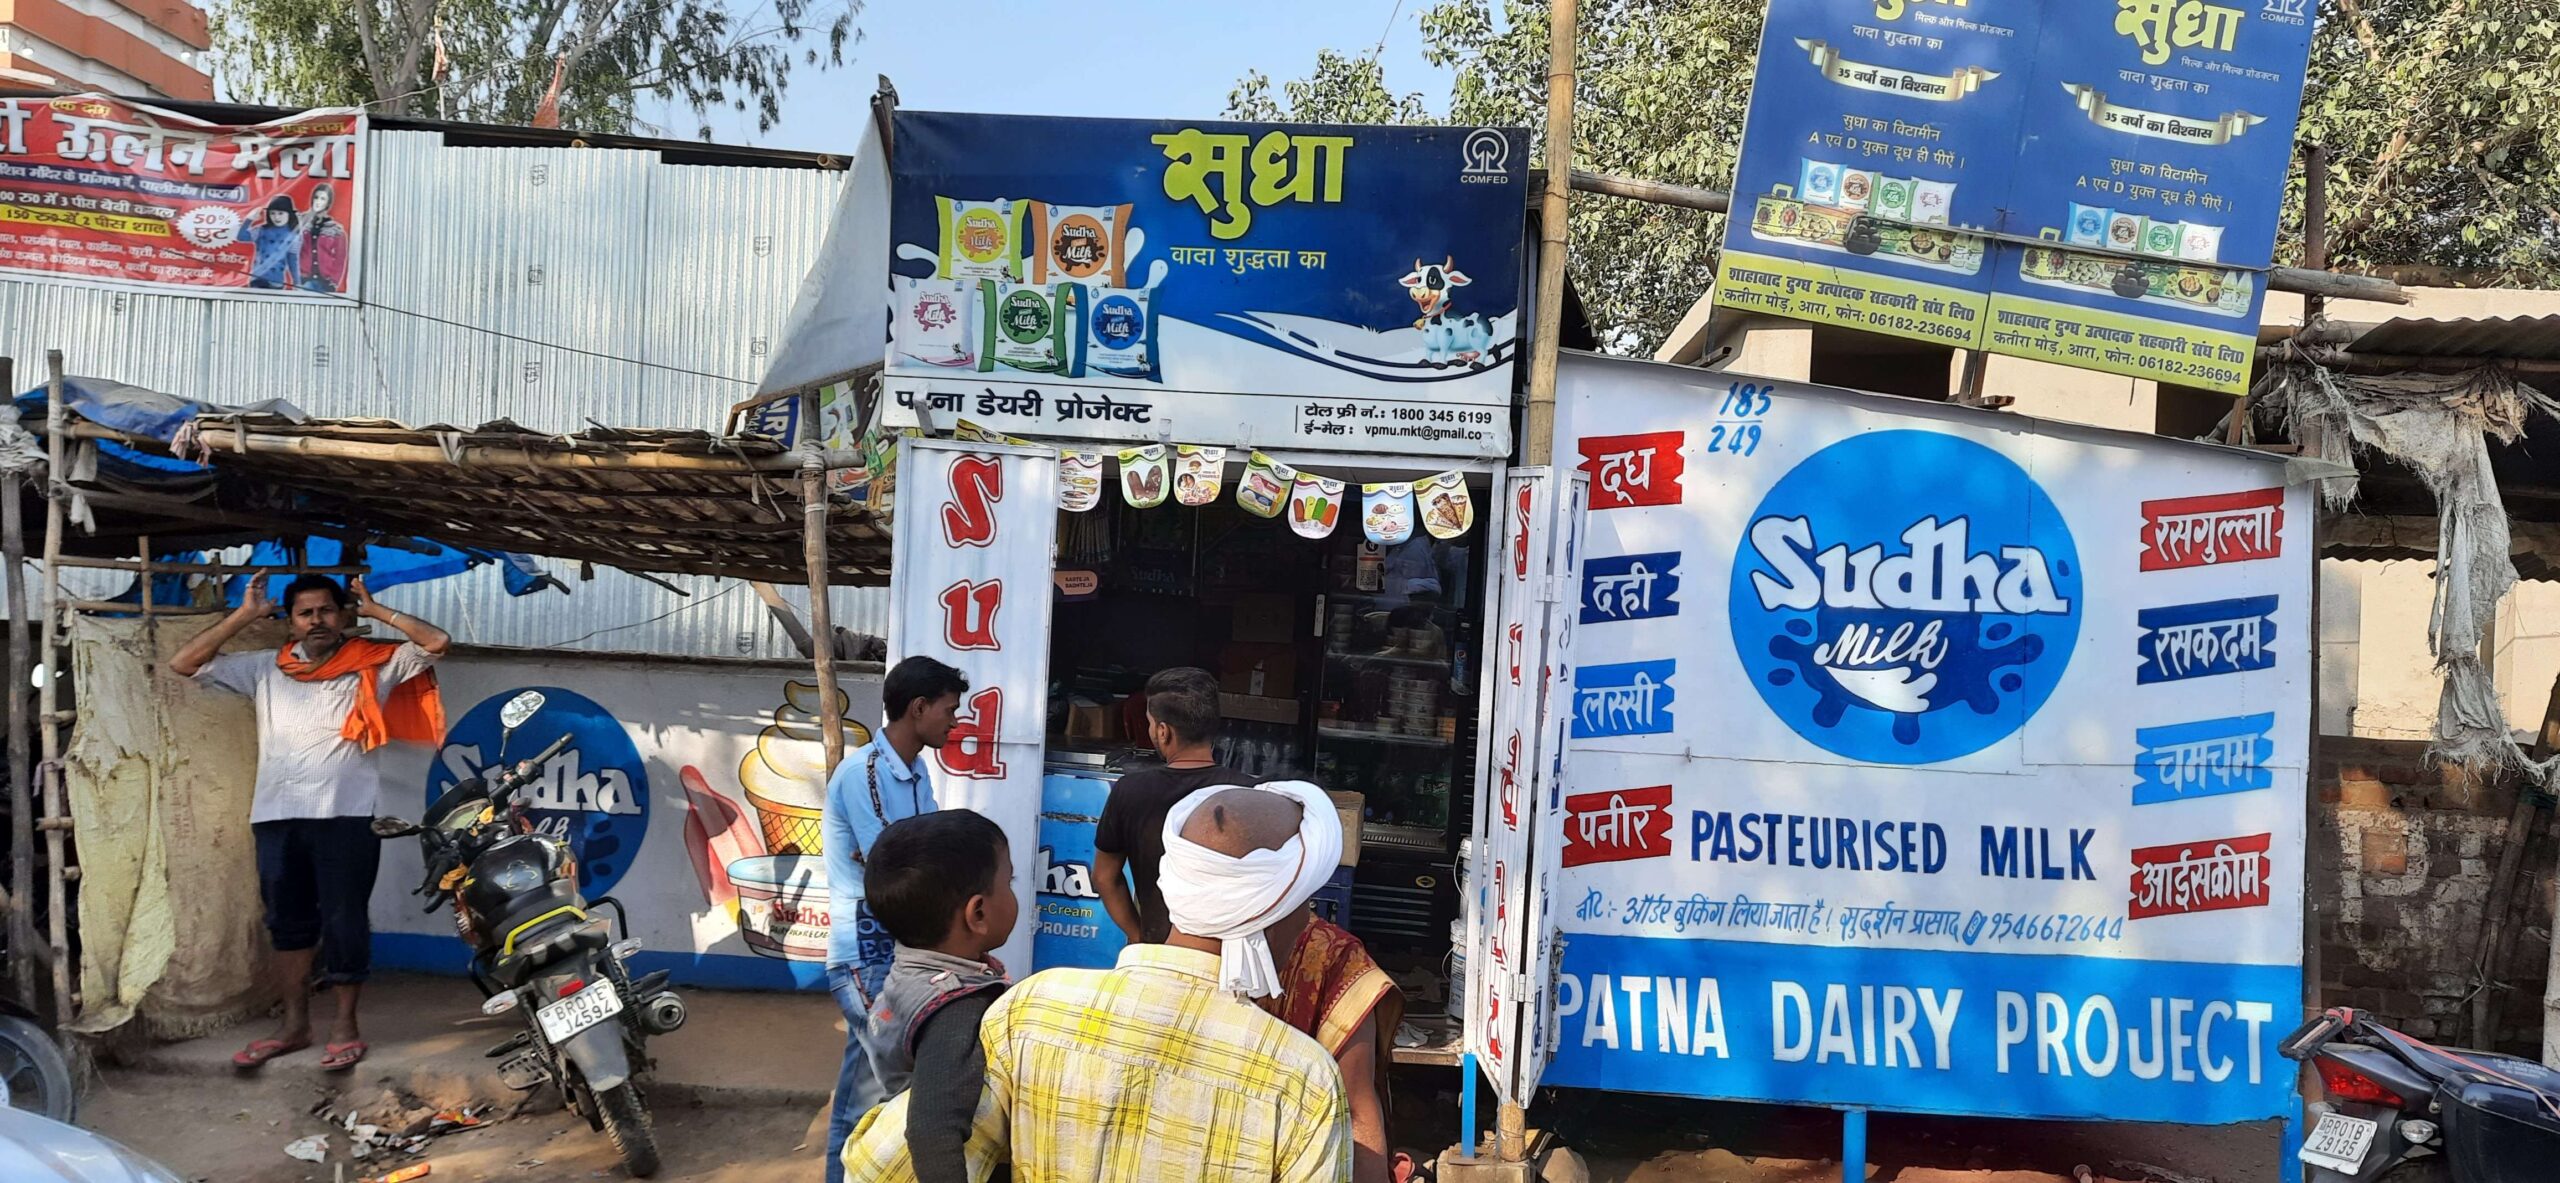 Sudha Dairy Products Center